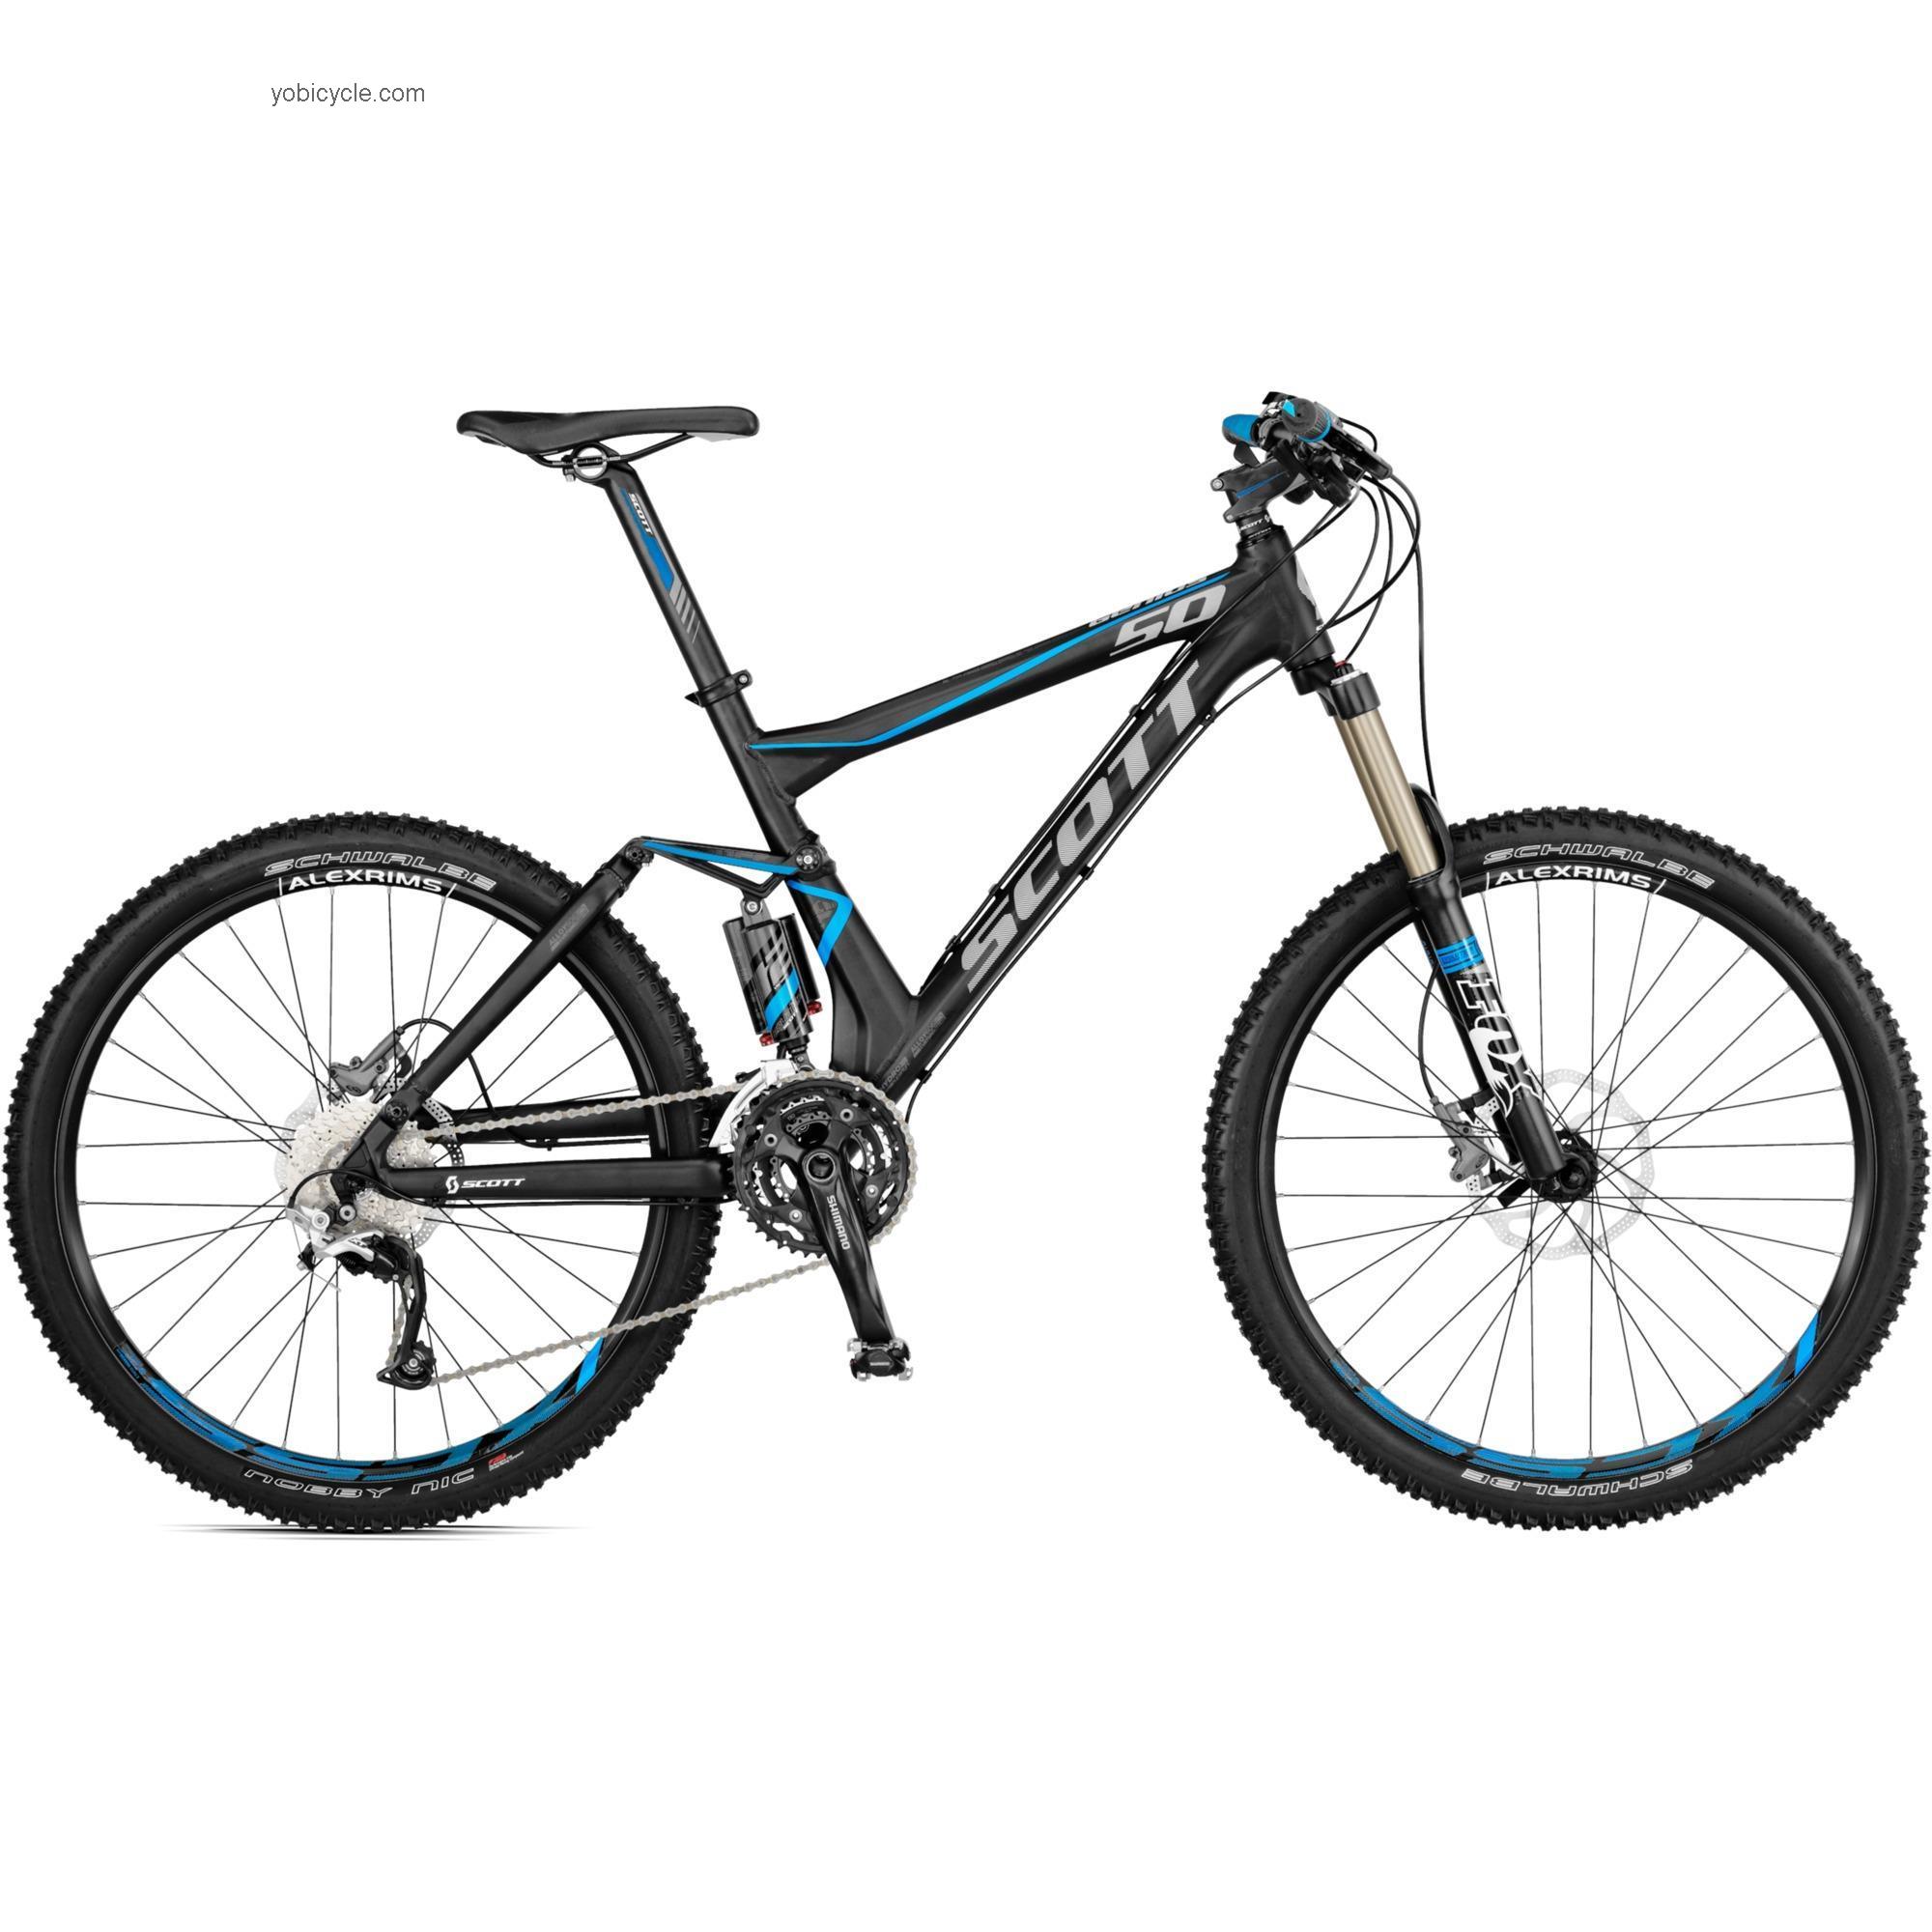 Scott  Genius 50 Technical data and specifications